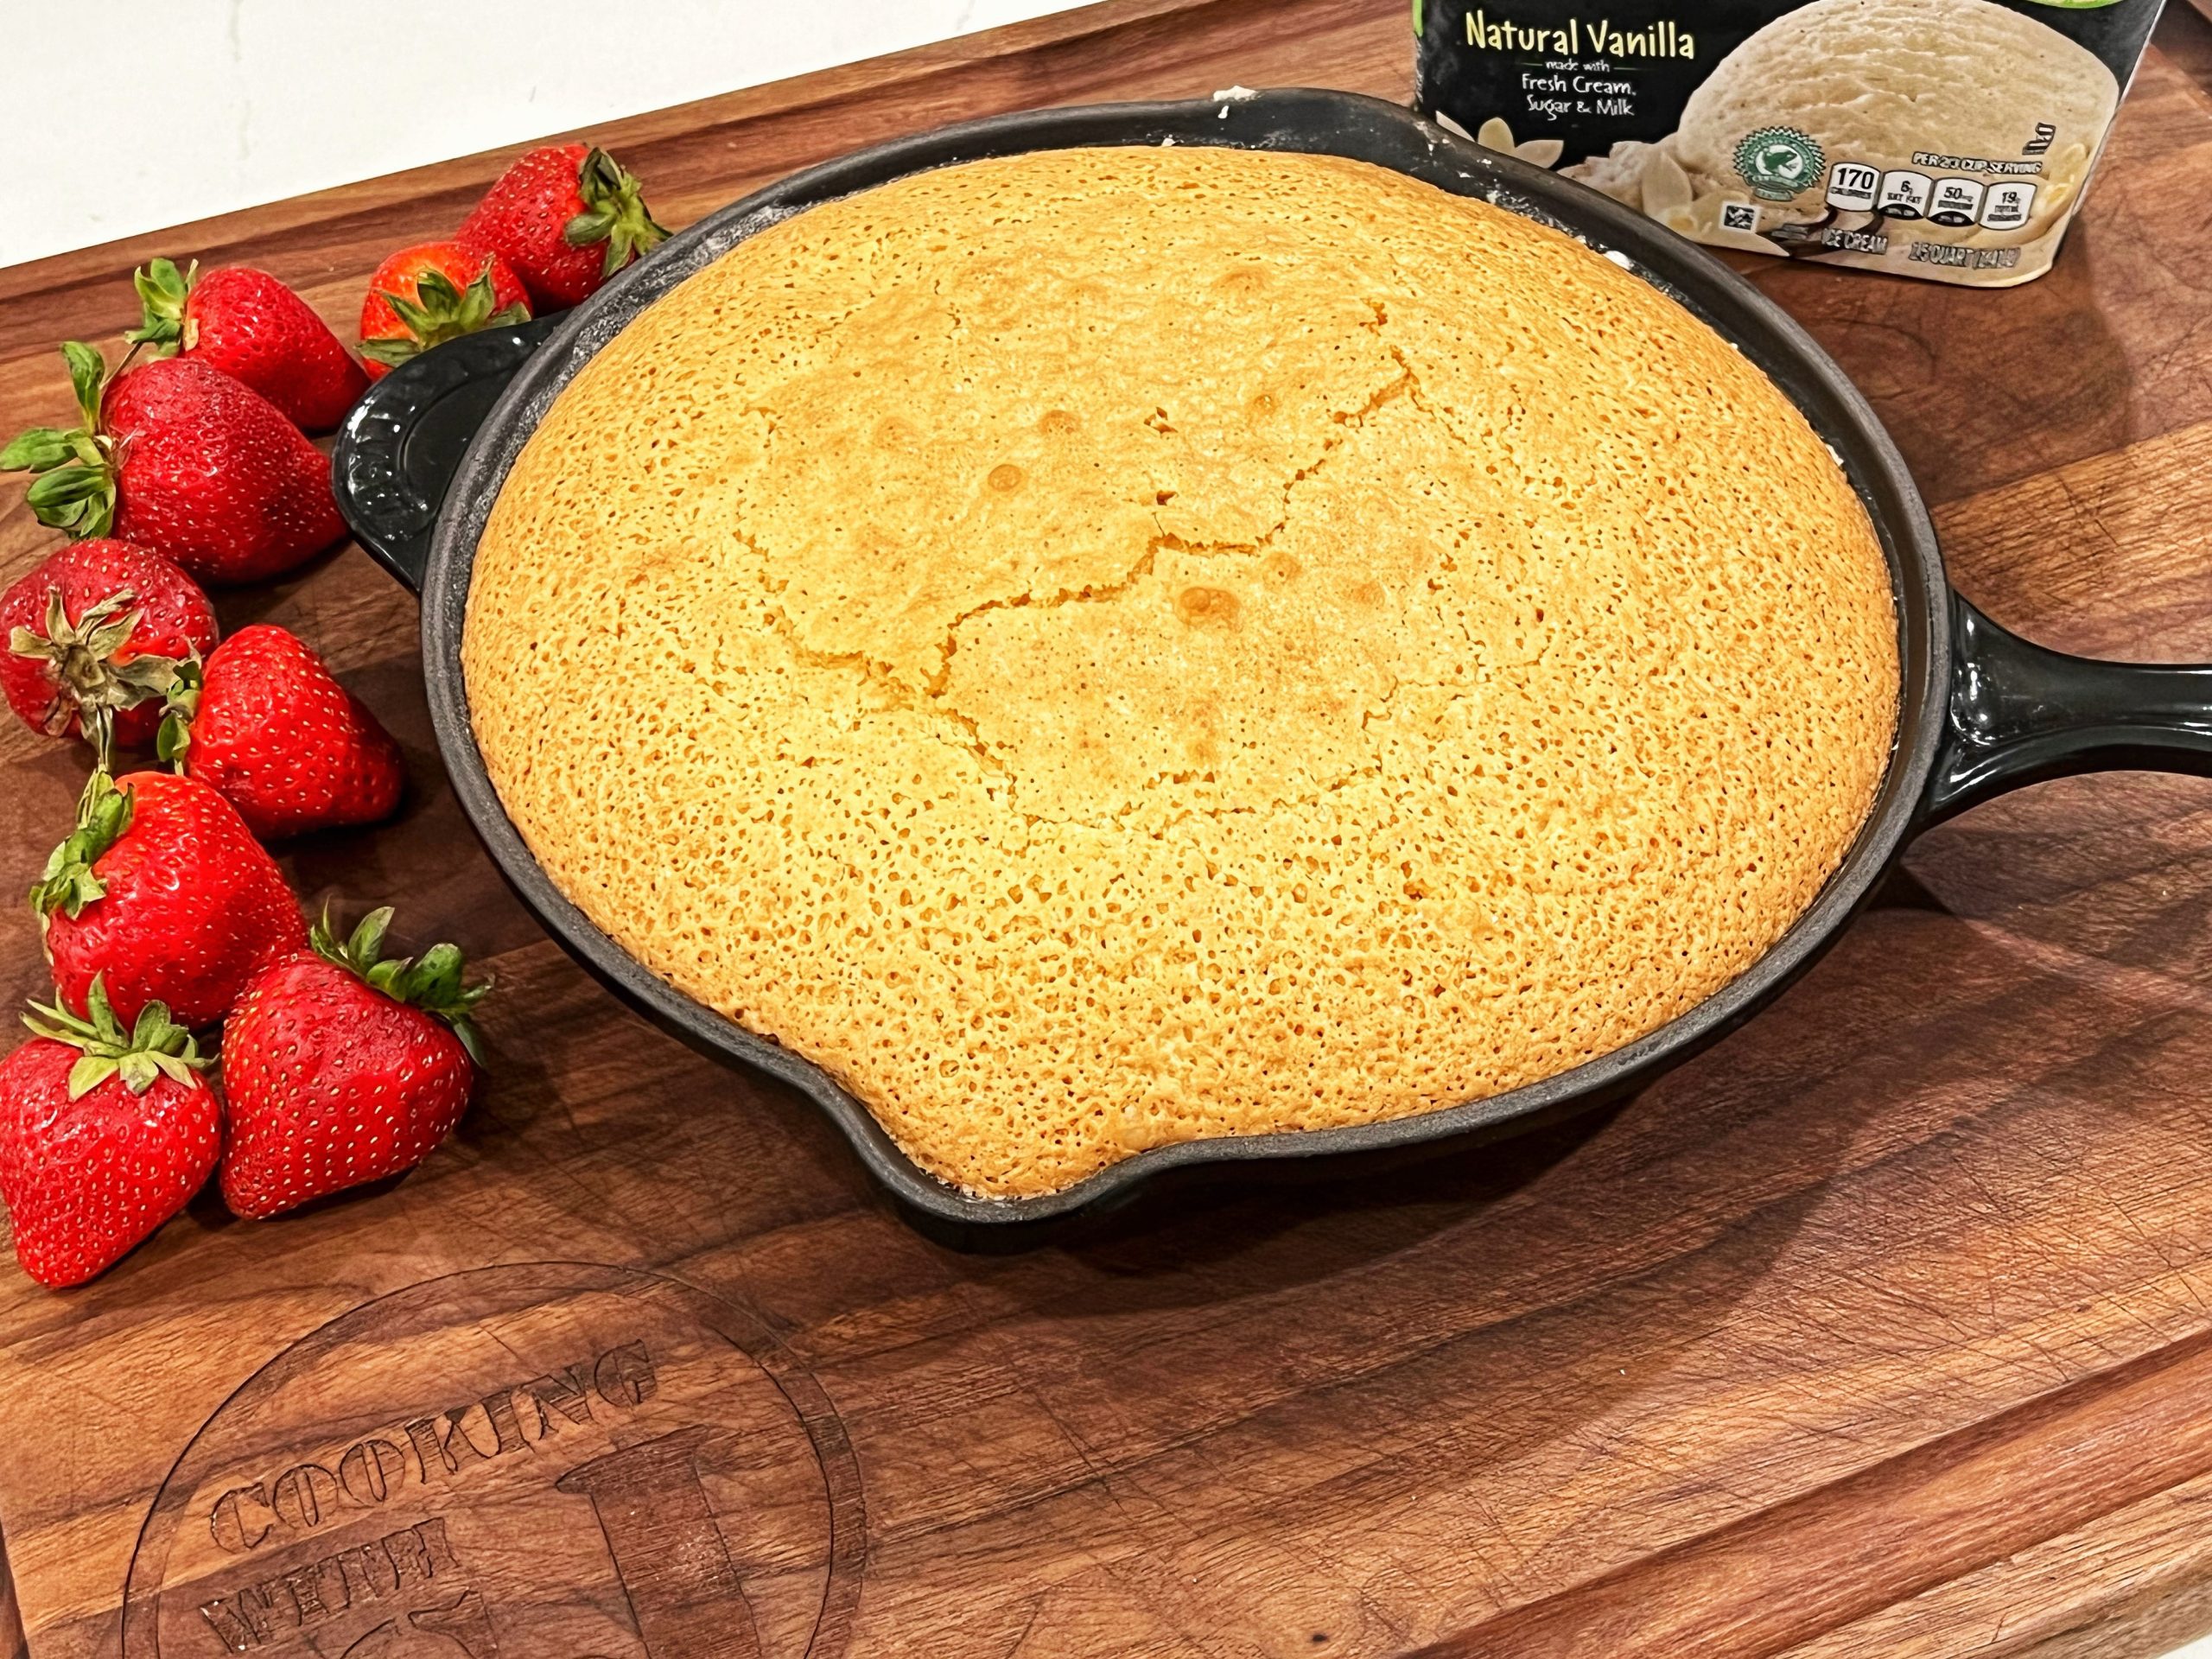 https://www.cookingwithcj.com/wp-content/uploads/2023/09/Pound-cake-scaled.jpg